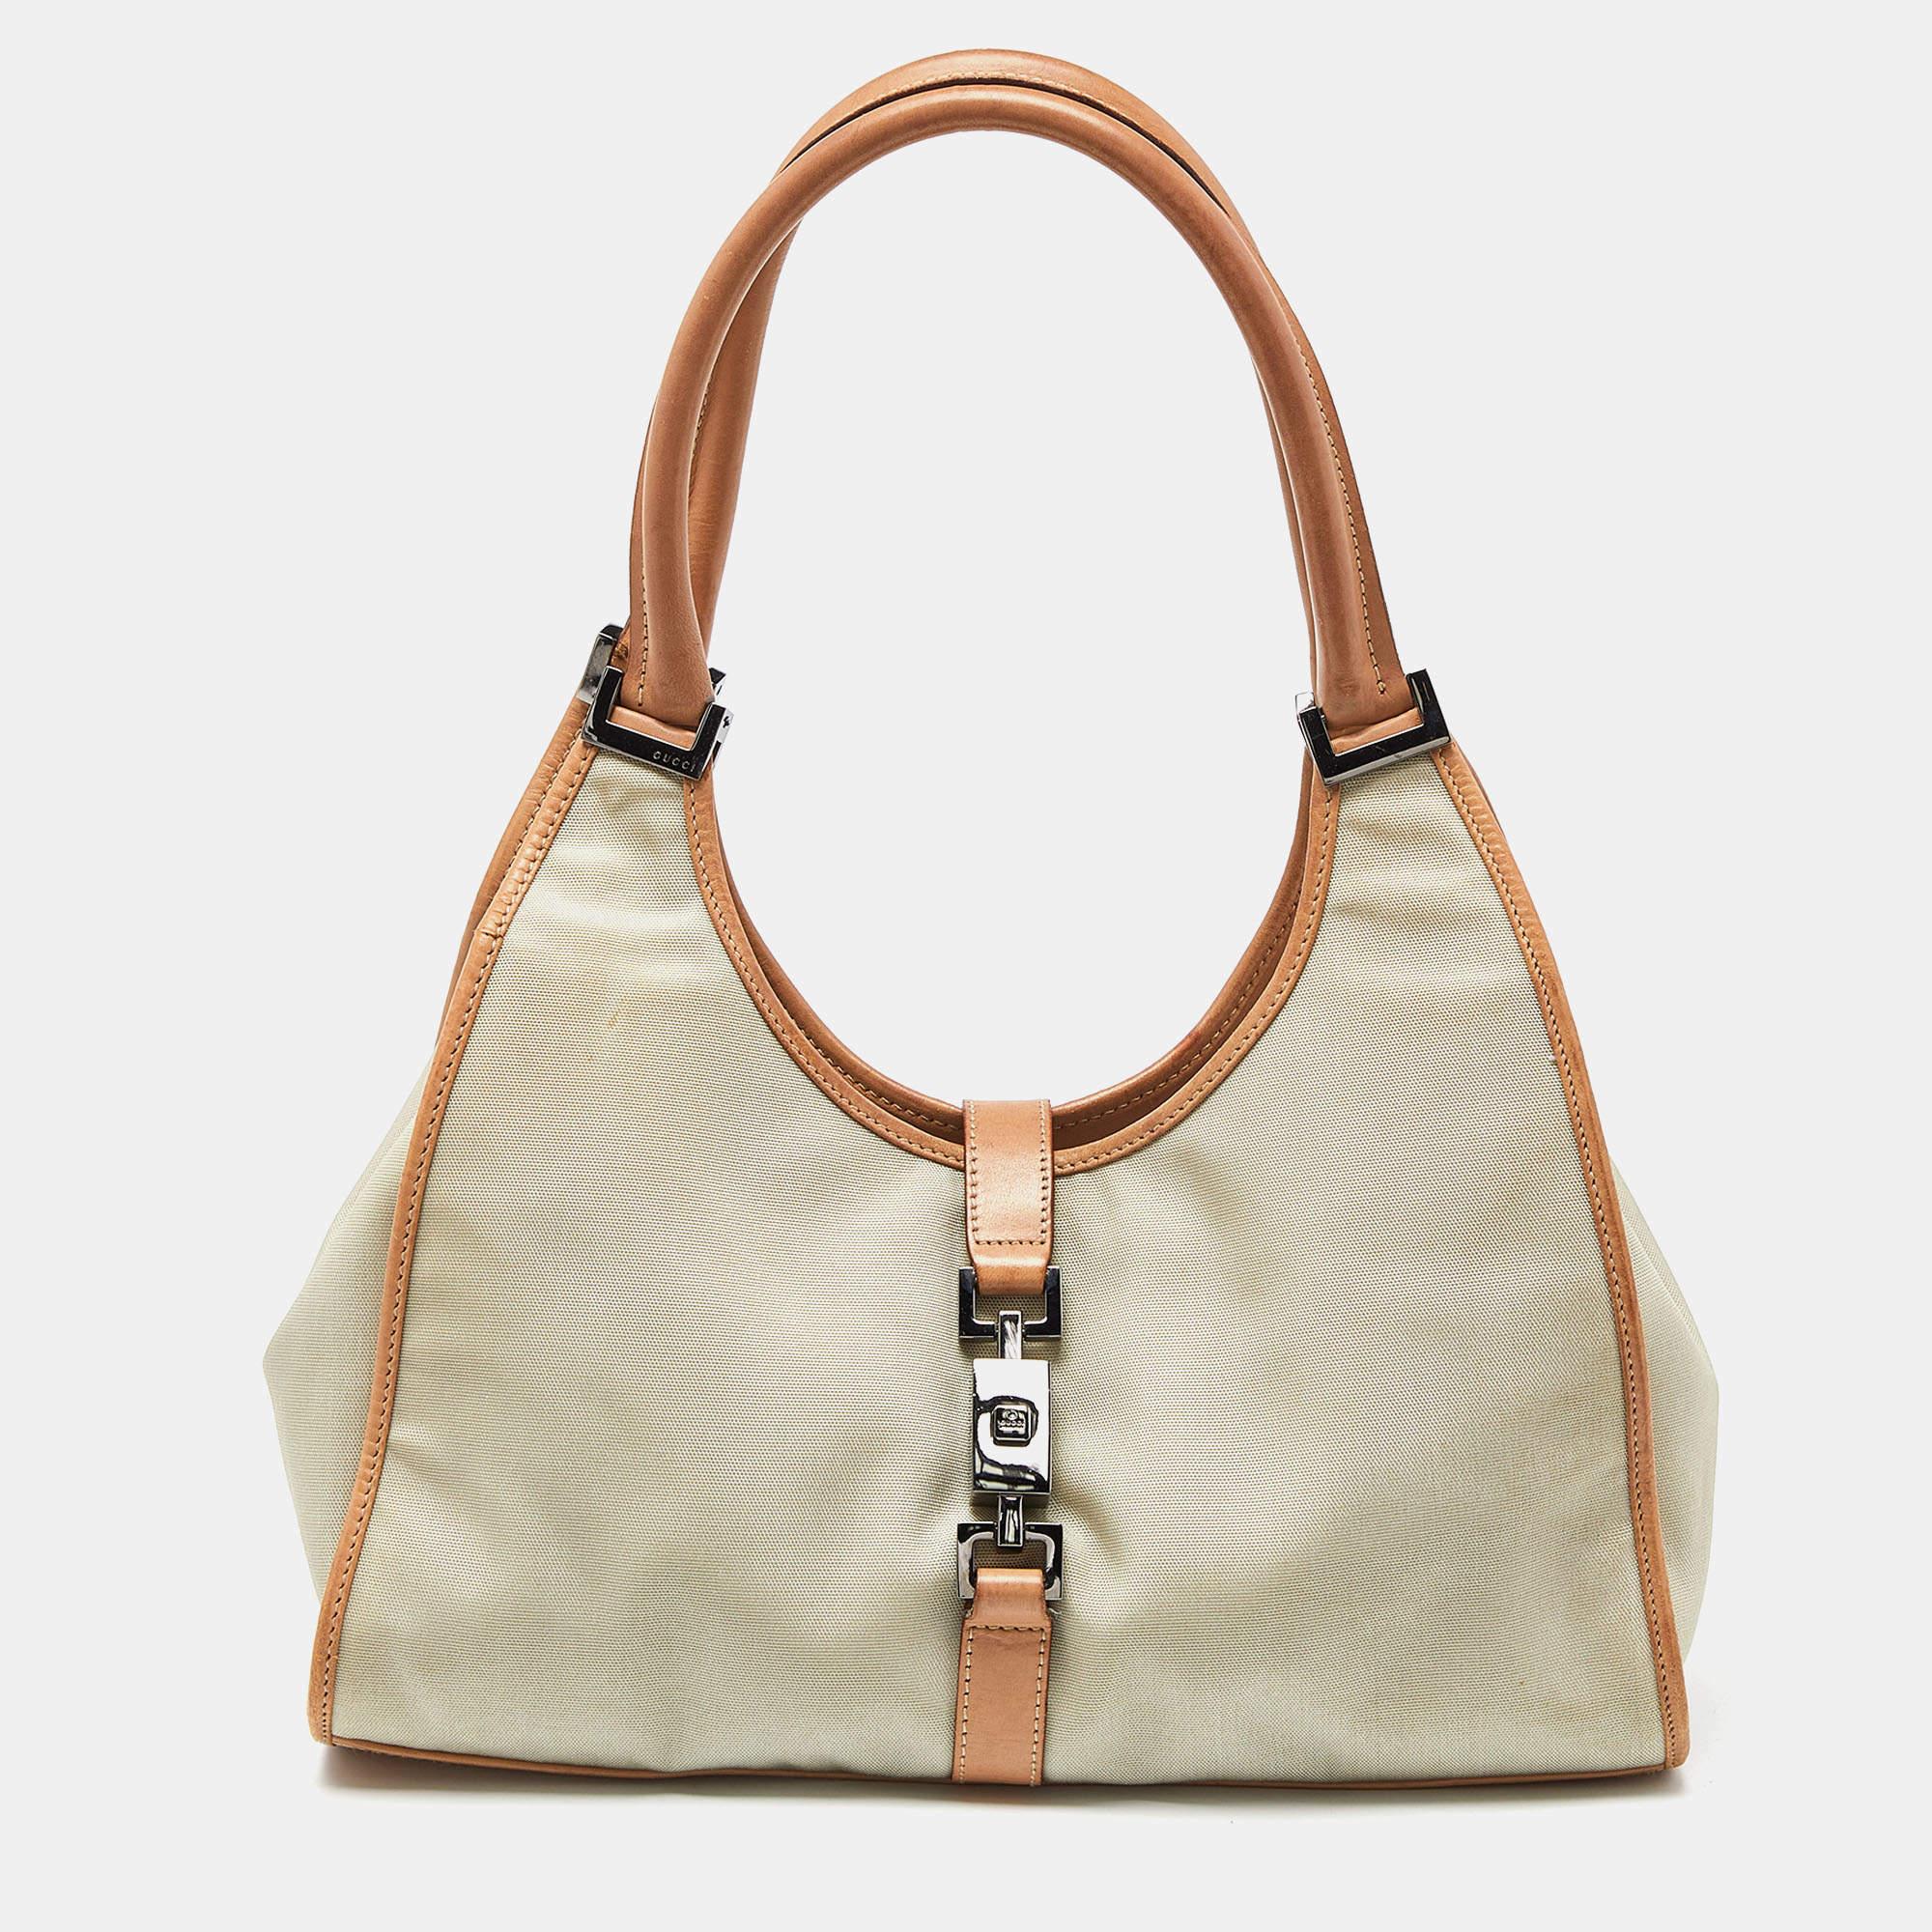 Gucci Beige/Tan Canvas and Leather Jackie Tote 8